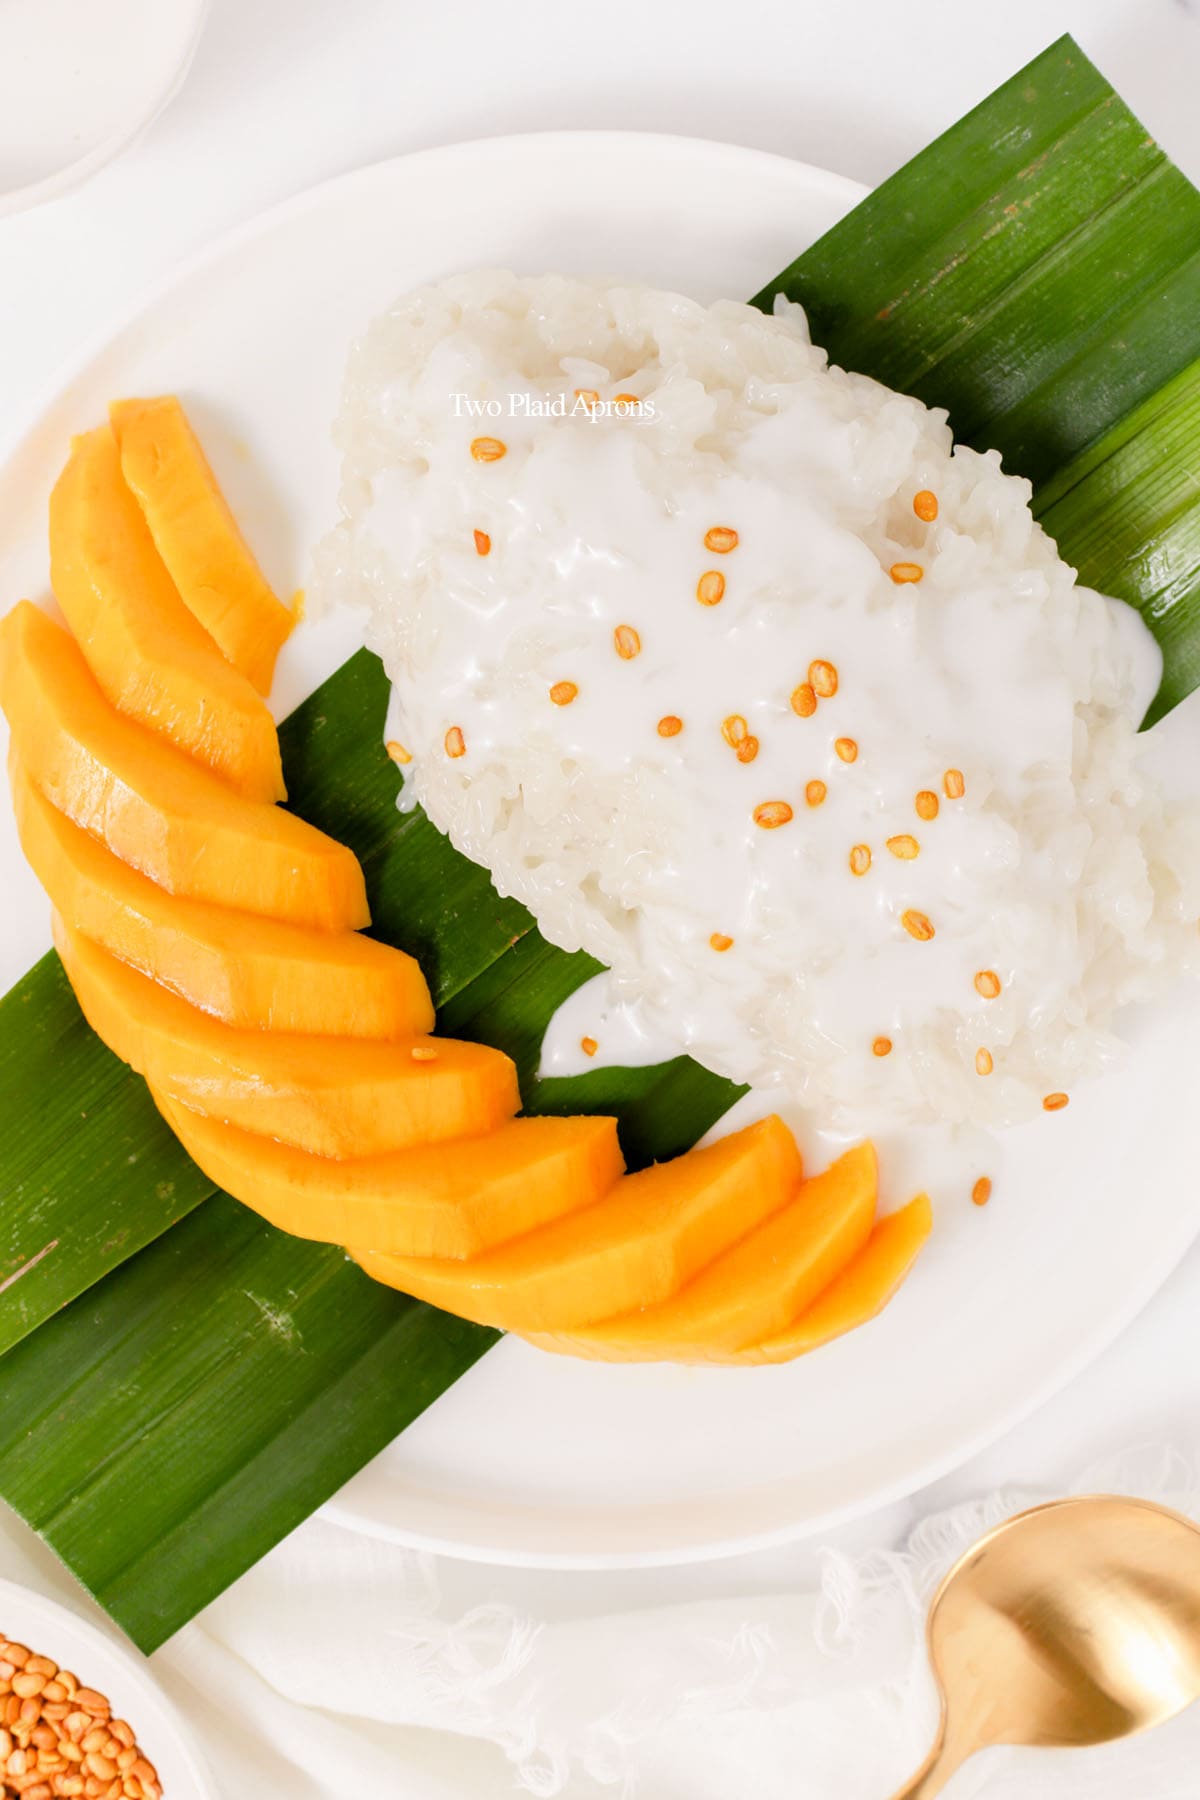 Mango sticky rice on a plate with sauce and split mung beans ono top.